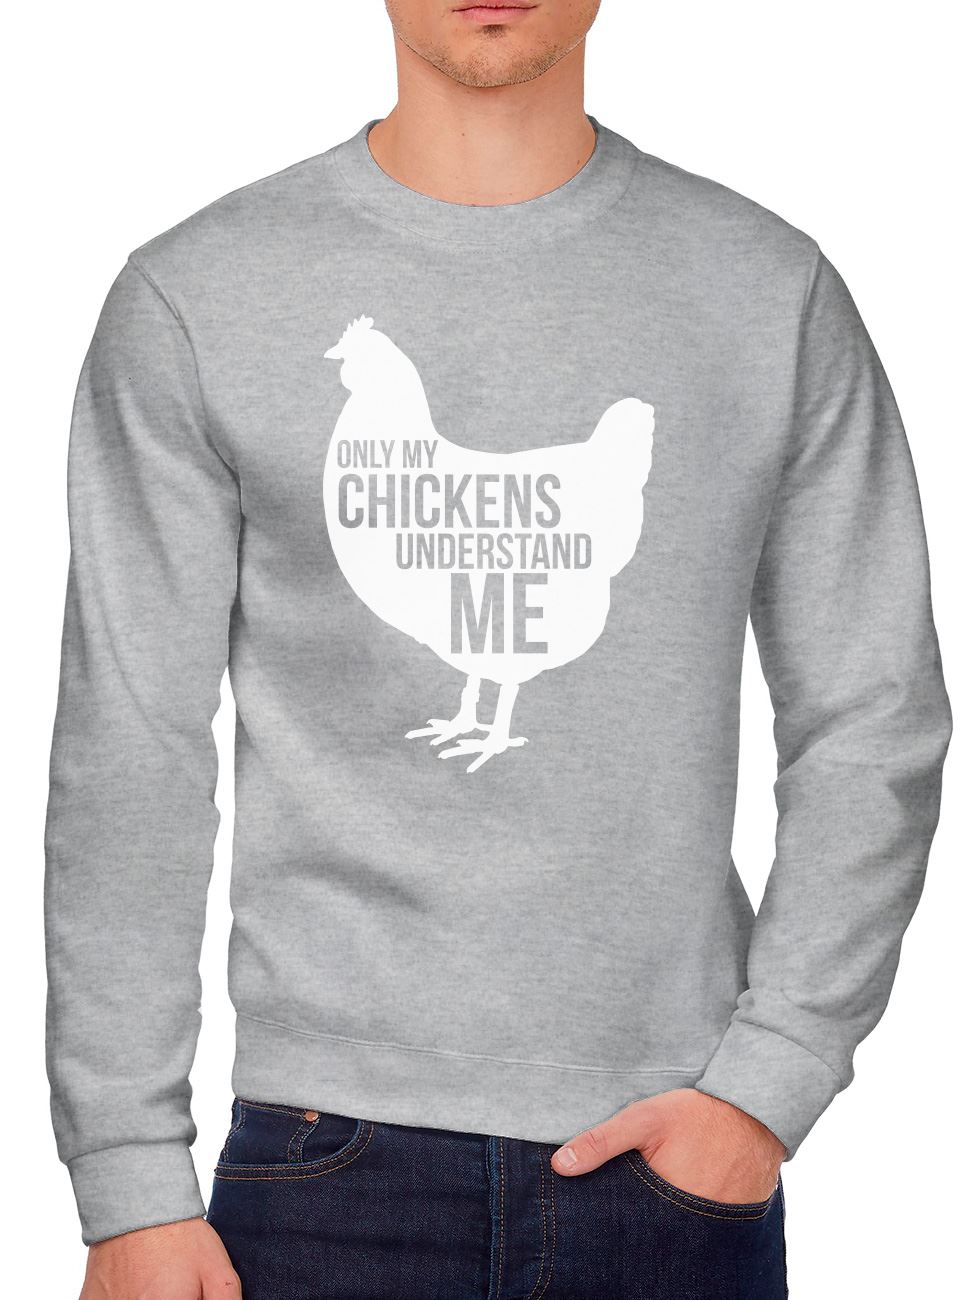 Only My Chickens Understand Me - Youth & Mens Sweatshirt